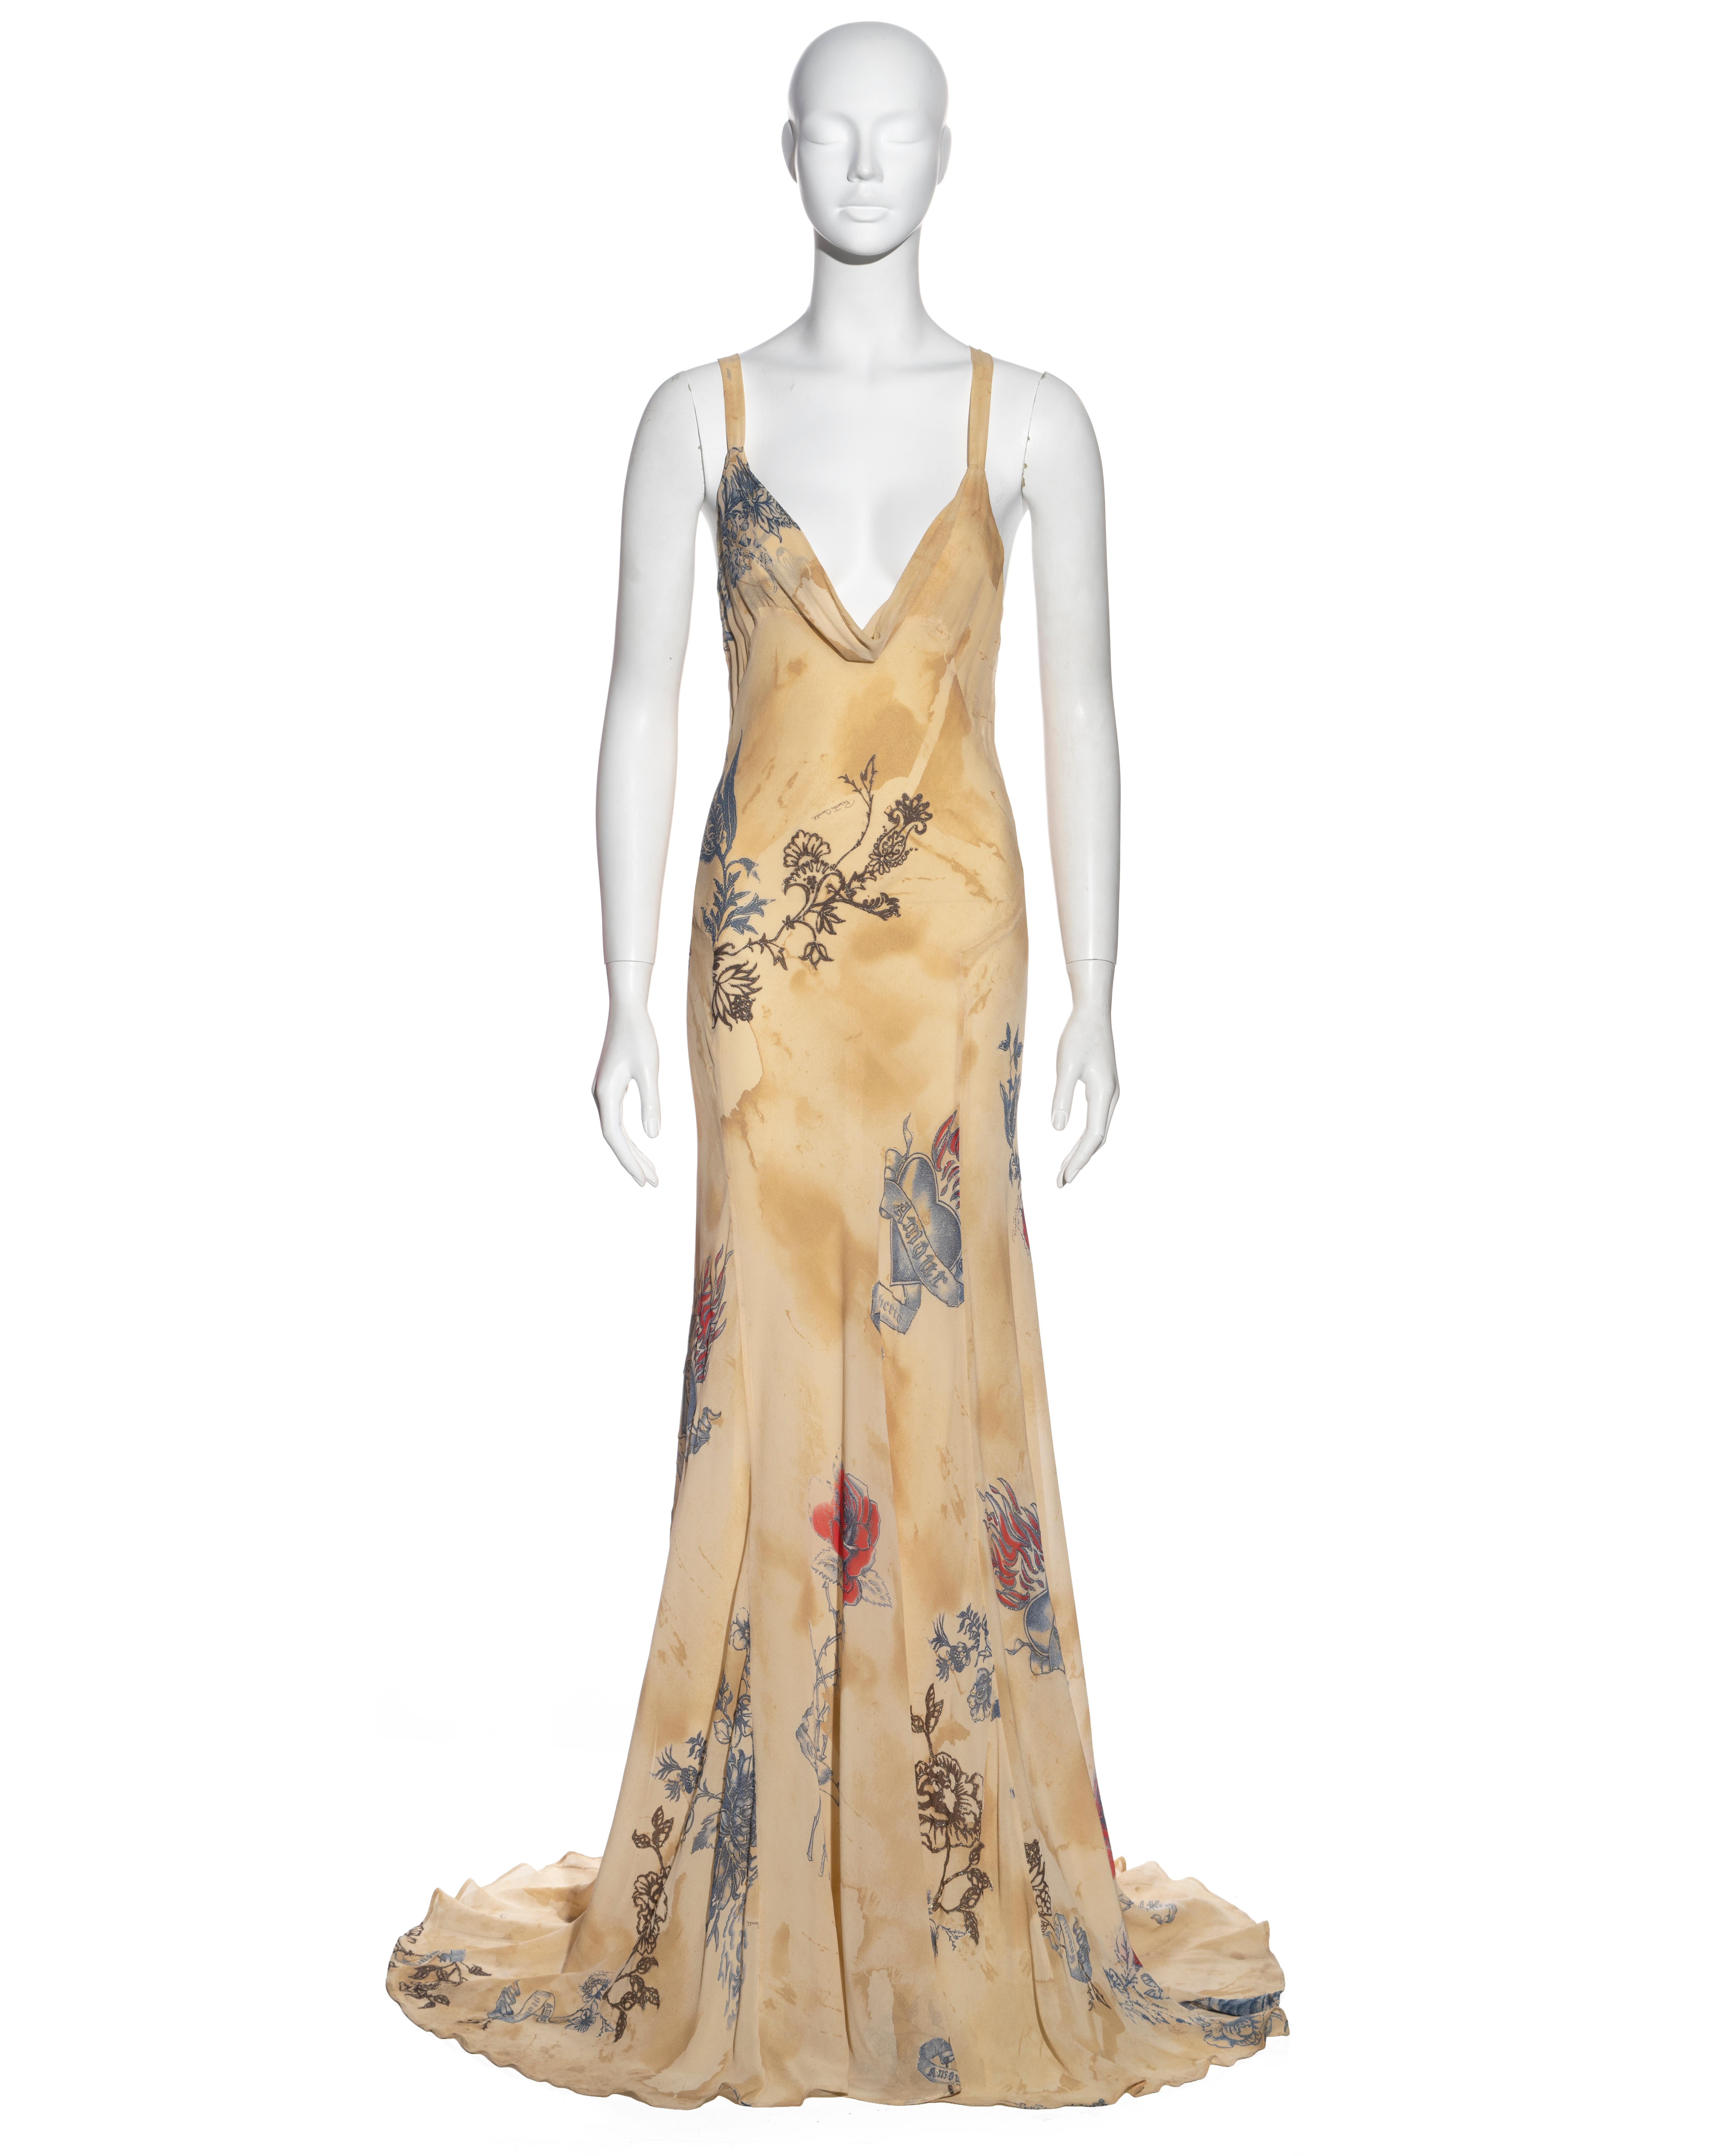 ▪ Roberto Cavalli evening dress  
▪ Sold by One of a Kind Archive
▪ Constructed from cream bias-cut silk
▪ Tattoo-style imagery of flowers, hearts and tigers
▪ Deep cowl neck 
▪ Open back 
▪ Floor-length skirt with train 
▪ Size Small
▪